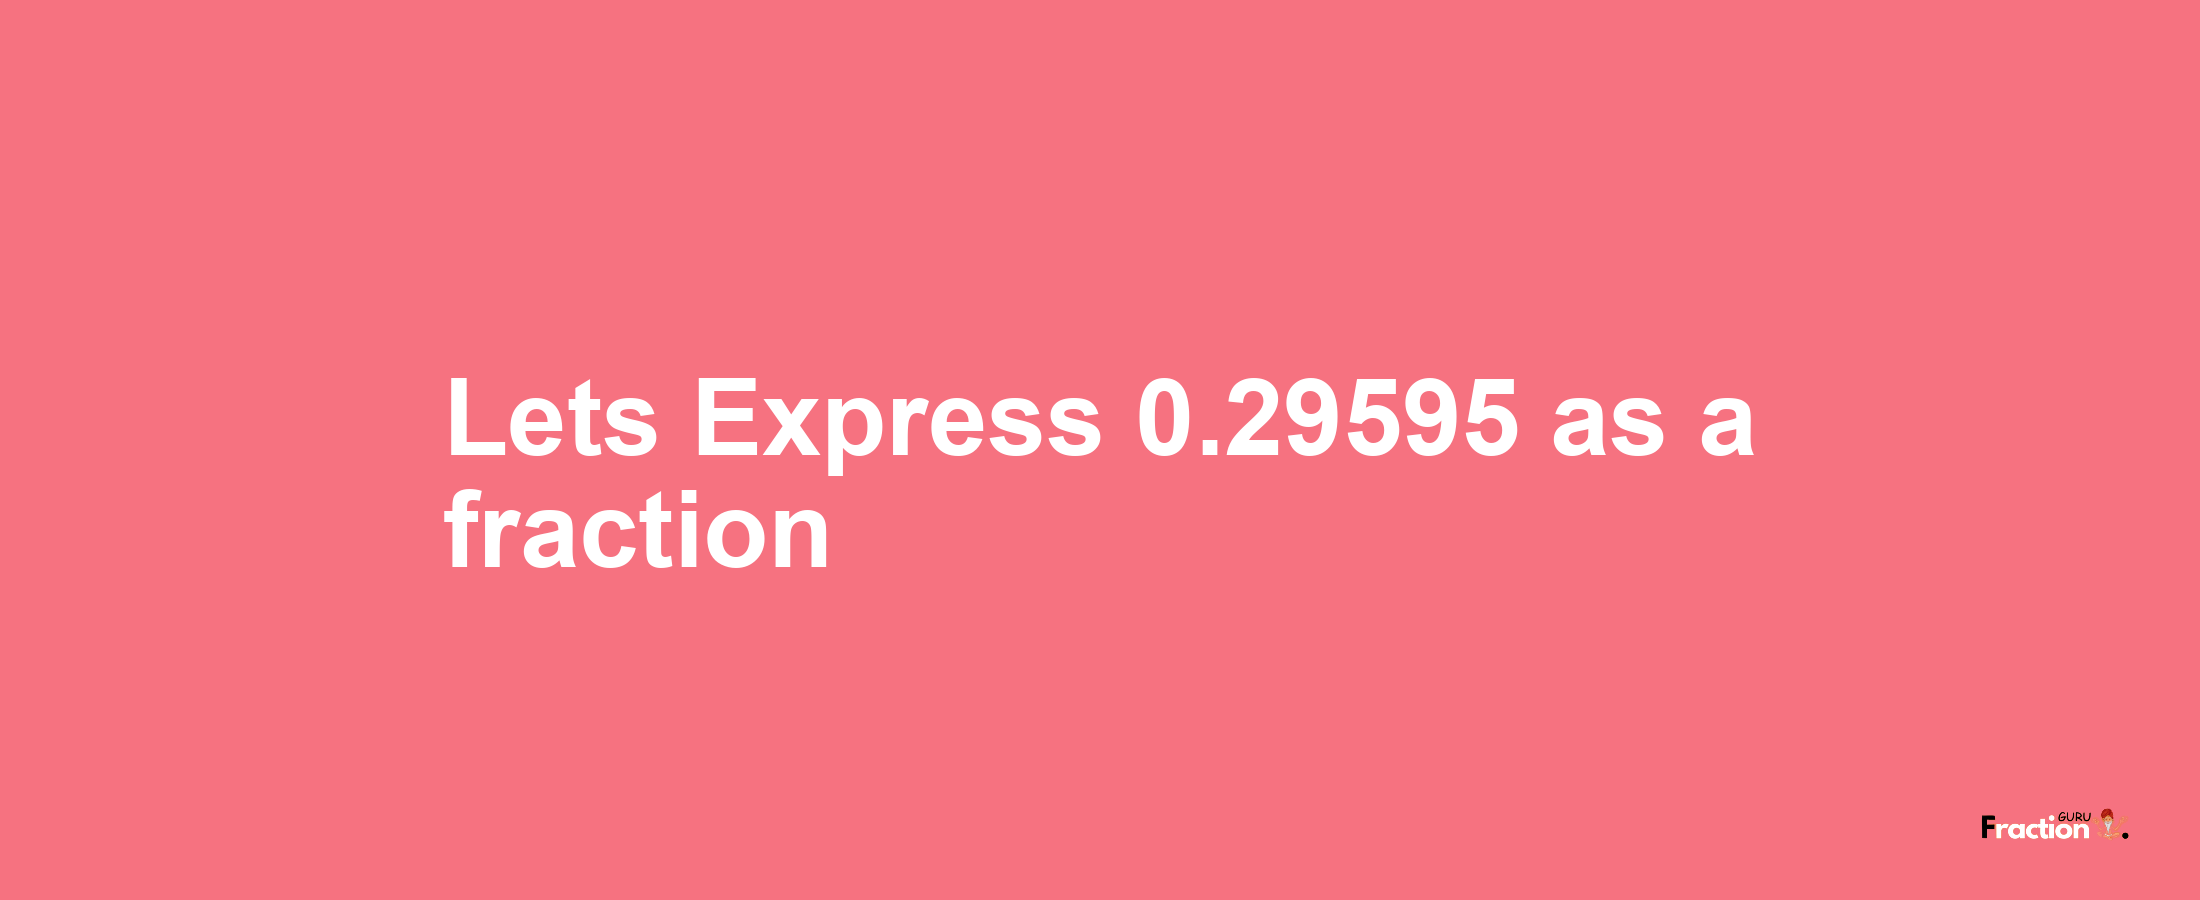 Lets Express 0.29595 as afraction